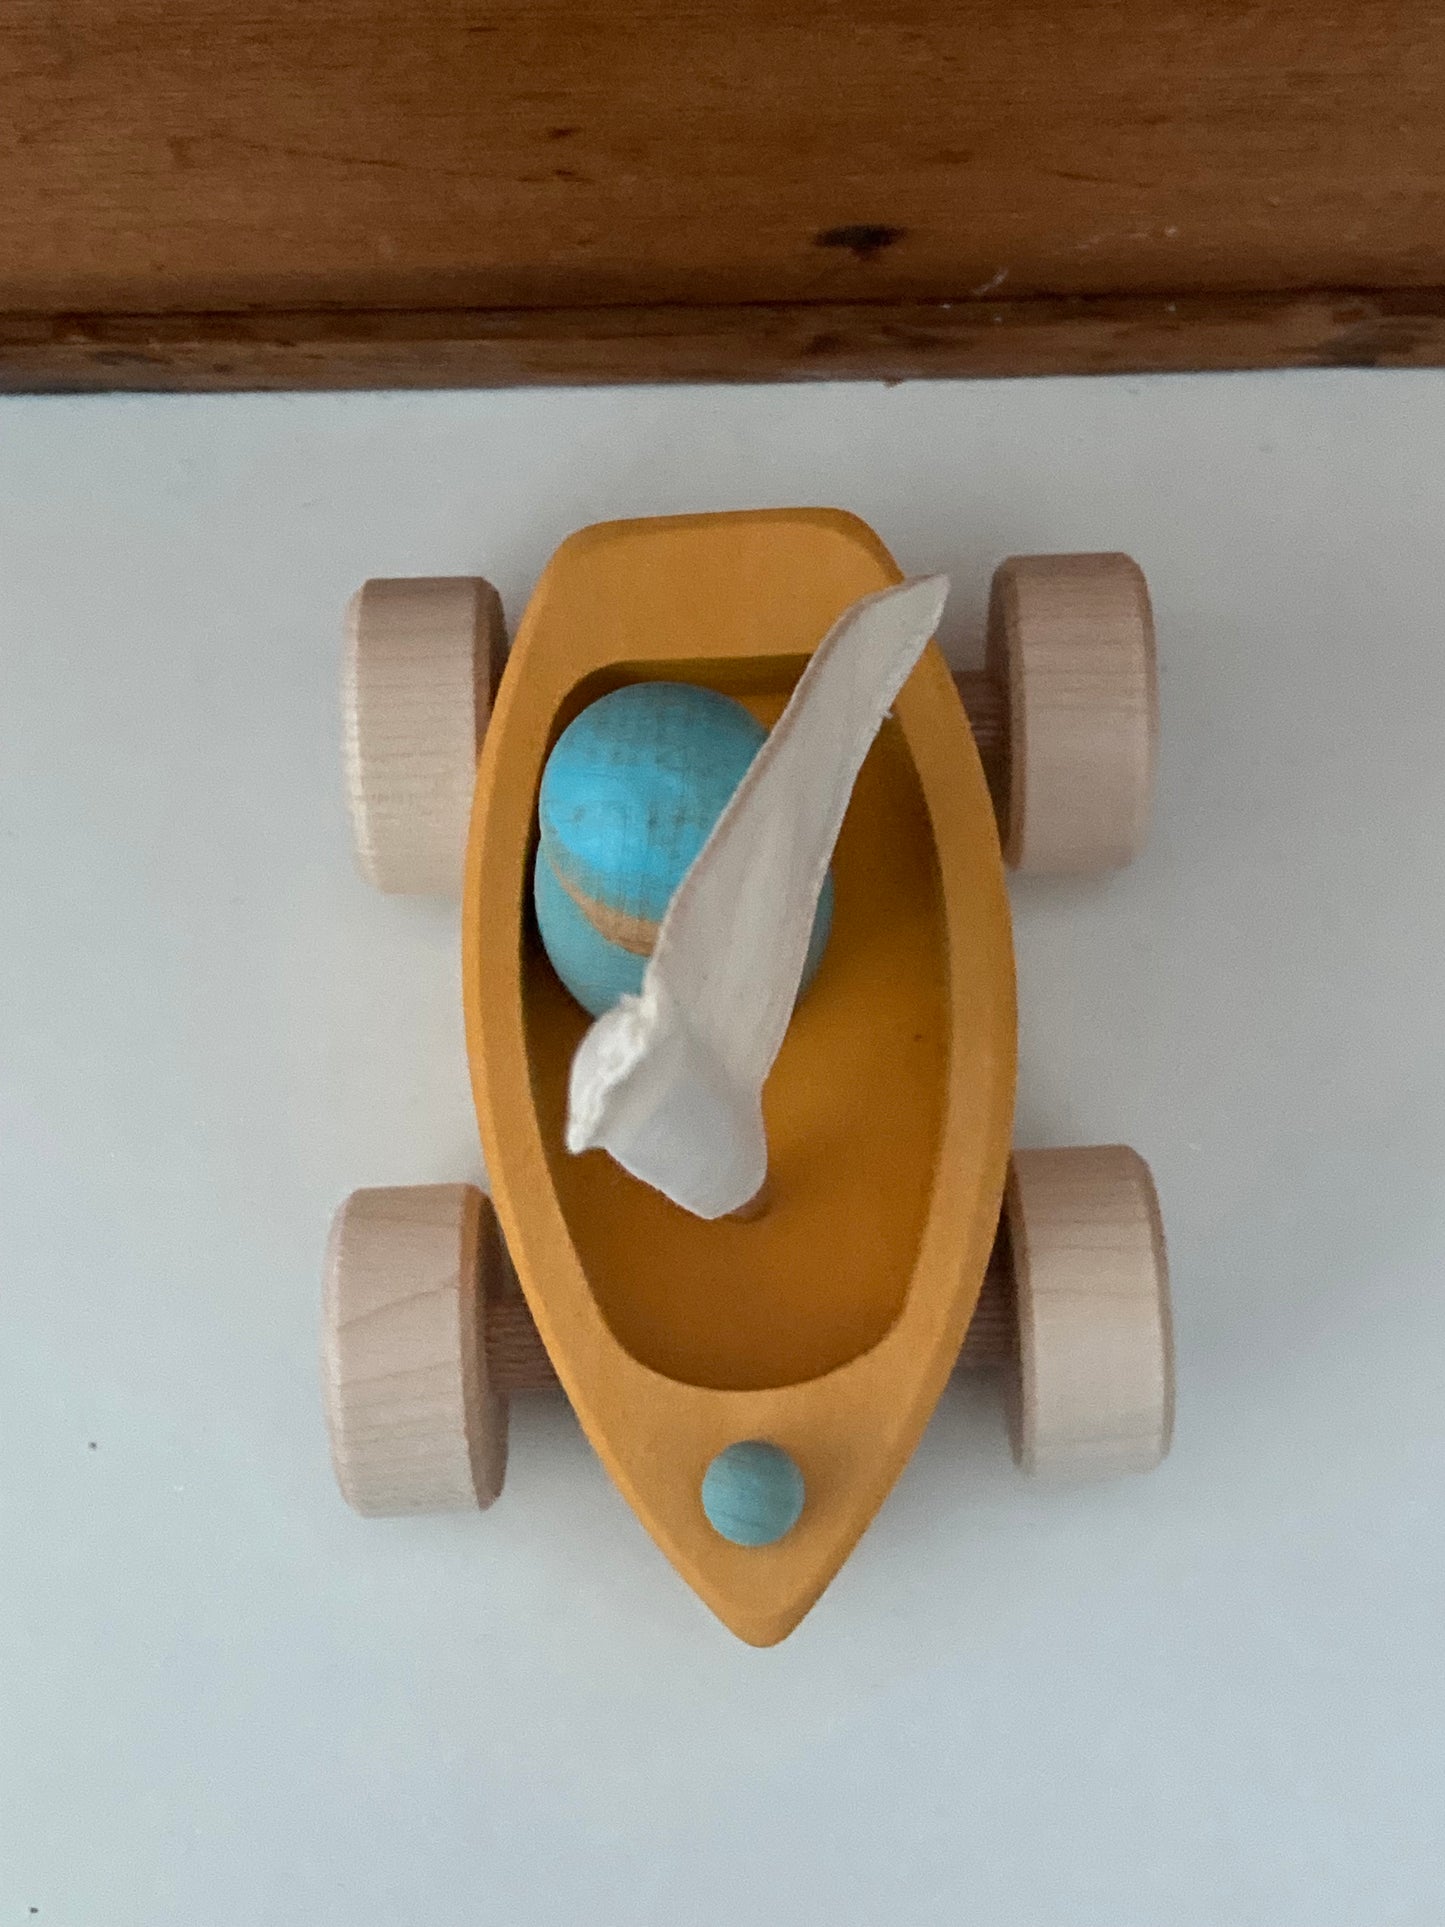 Wooden Toy - SAILBOAT in YELLOW GOLD with SKIPPER in BLUE… on wheels!